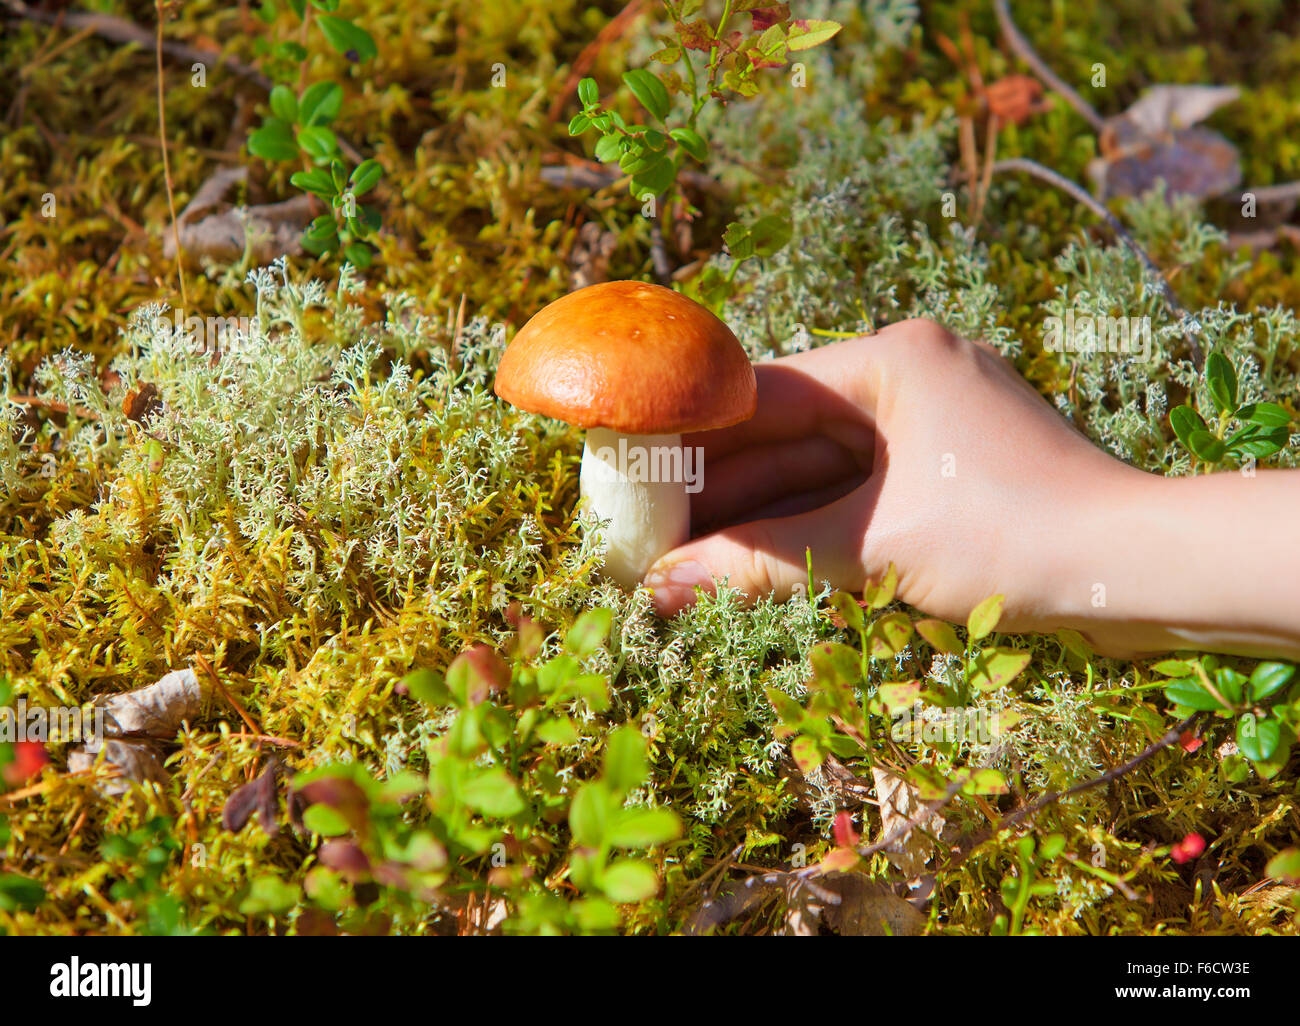 Young woman picking mushroom in grass in forest close-up view. Stock Photo